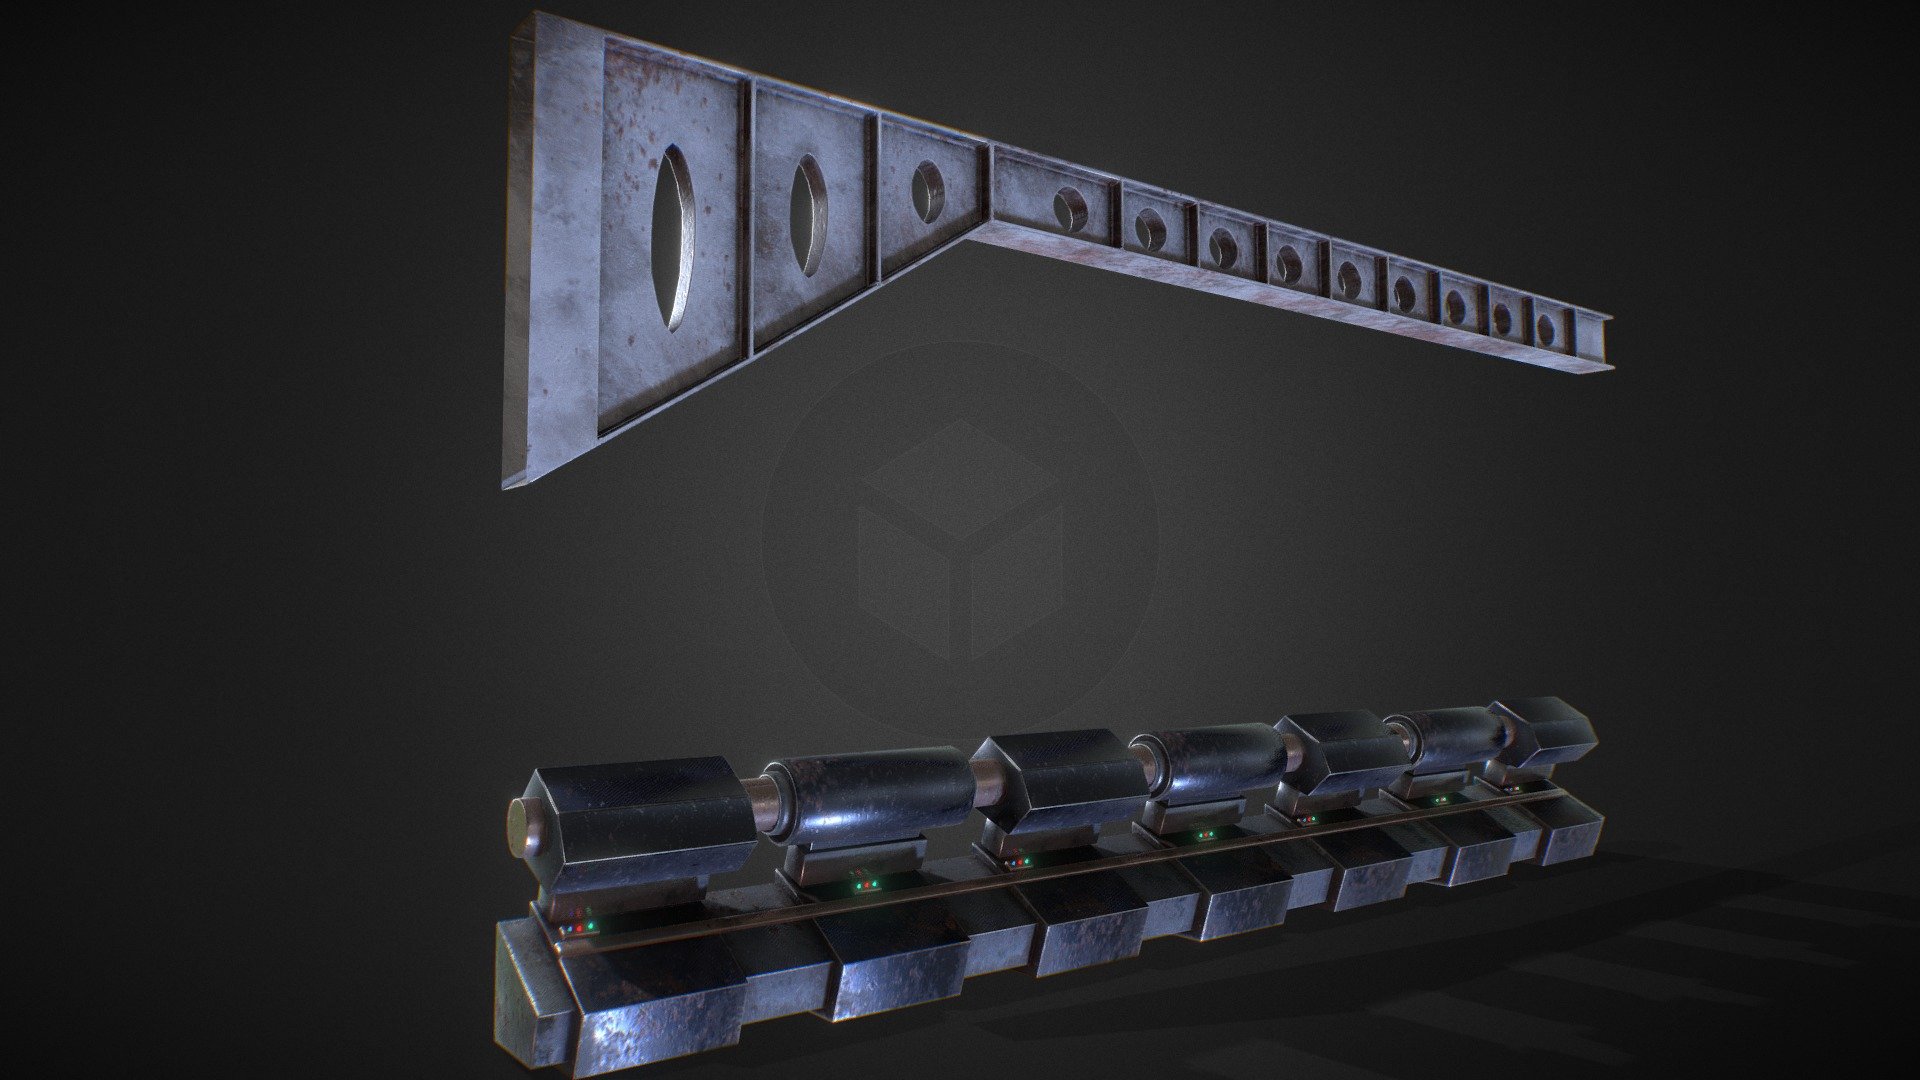 Hydraulic Machine: LOD0: 2938 tris (1729 verts) and LOD1 942 tris (687 verts)




UV mapping Ch1 (some overlaping for symmetry or part repeated) and Ch2 (No overlapping)

Materials: 1




Main Beam: 1,938 tris (954 verts) 




UV mapping Ch1 (some overlaping for symmetry or part repeated) and Ch2 (No overlapping) 

Materials: 1



All meshes have PBR textures with Albedo, roughness, metallic, Ambient Occlusion, height, emissive (if required) and Normal Map.
Also contains the followings textures: Opacity mask (if required), Diffuse, Glossiness, Specular 3d model